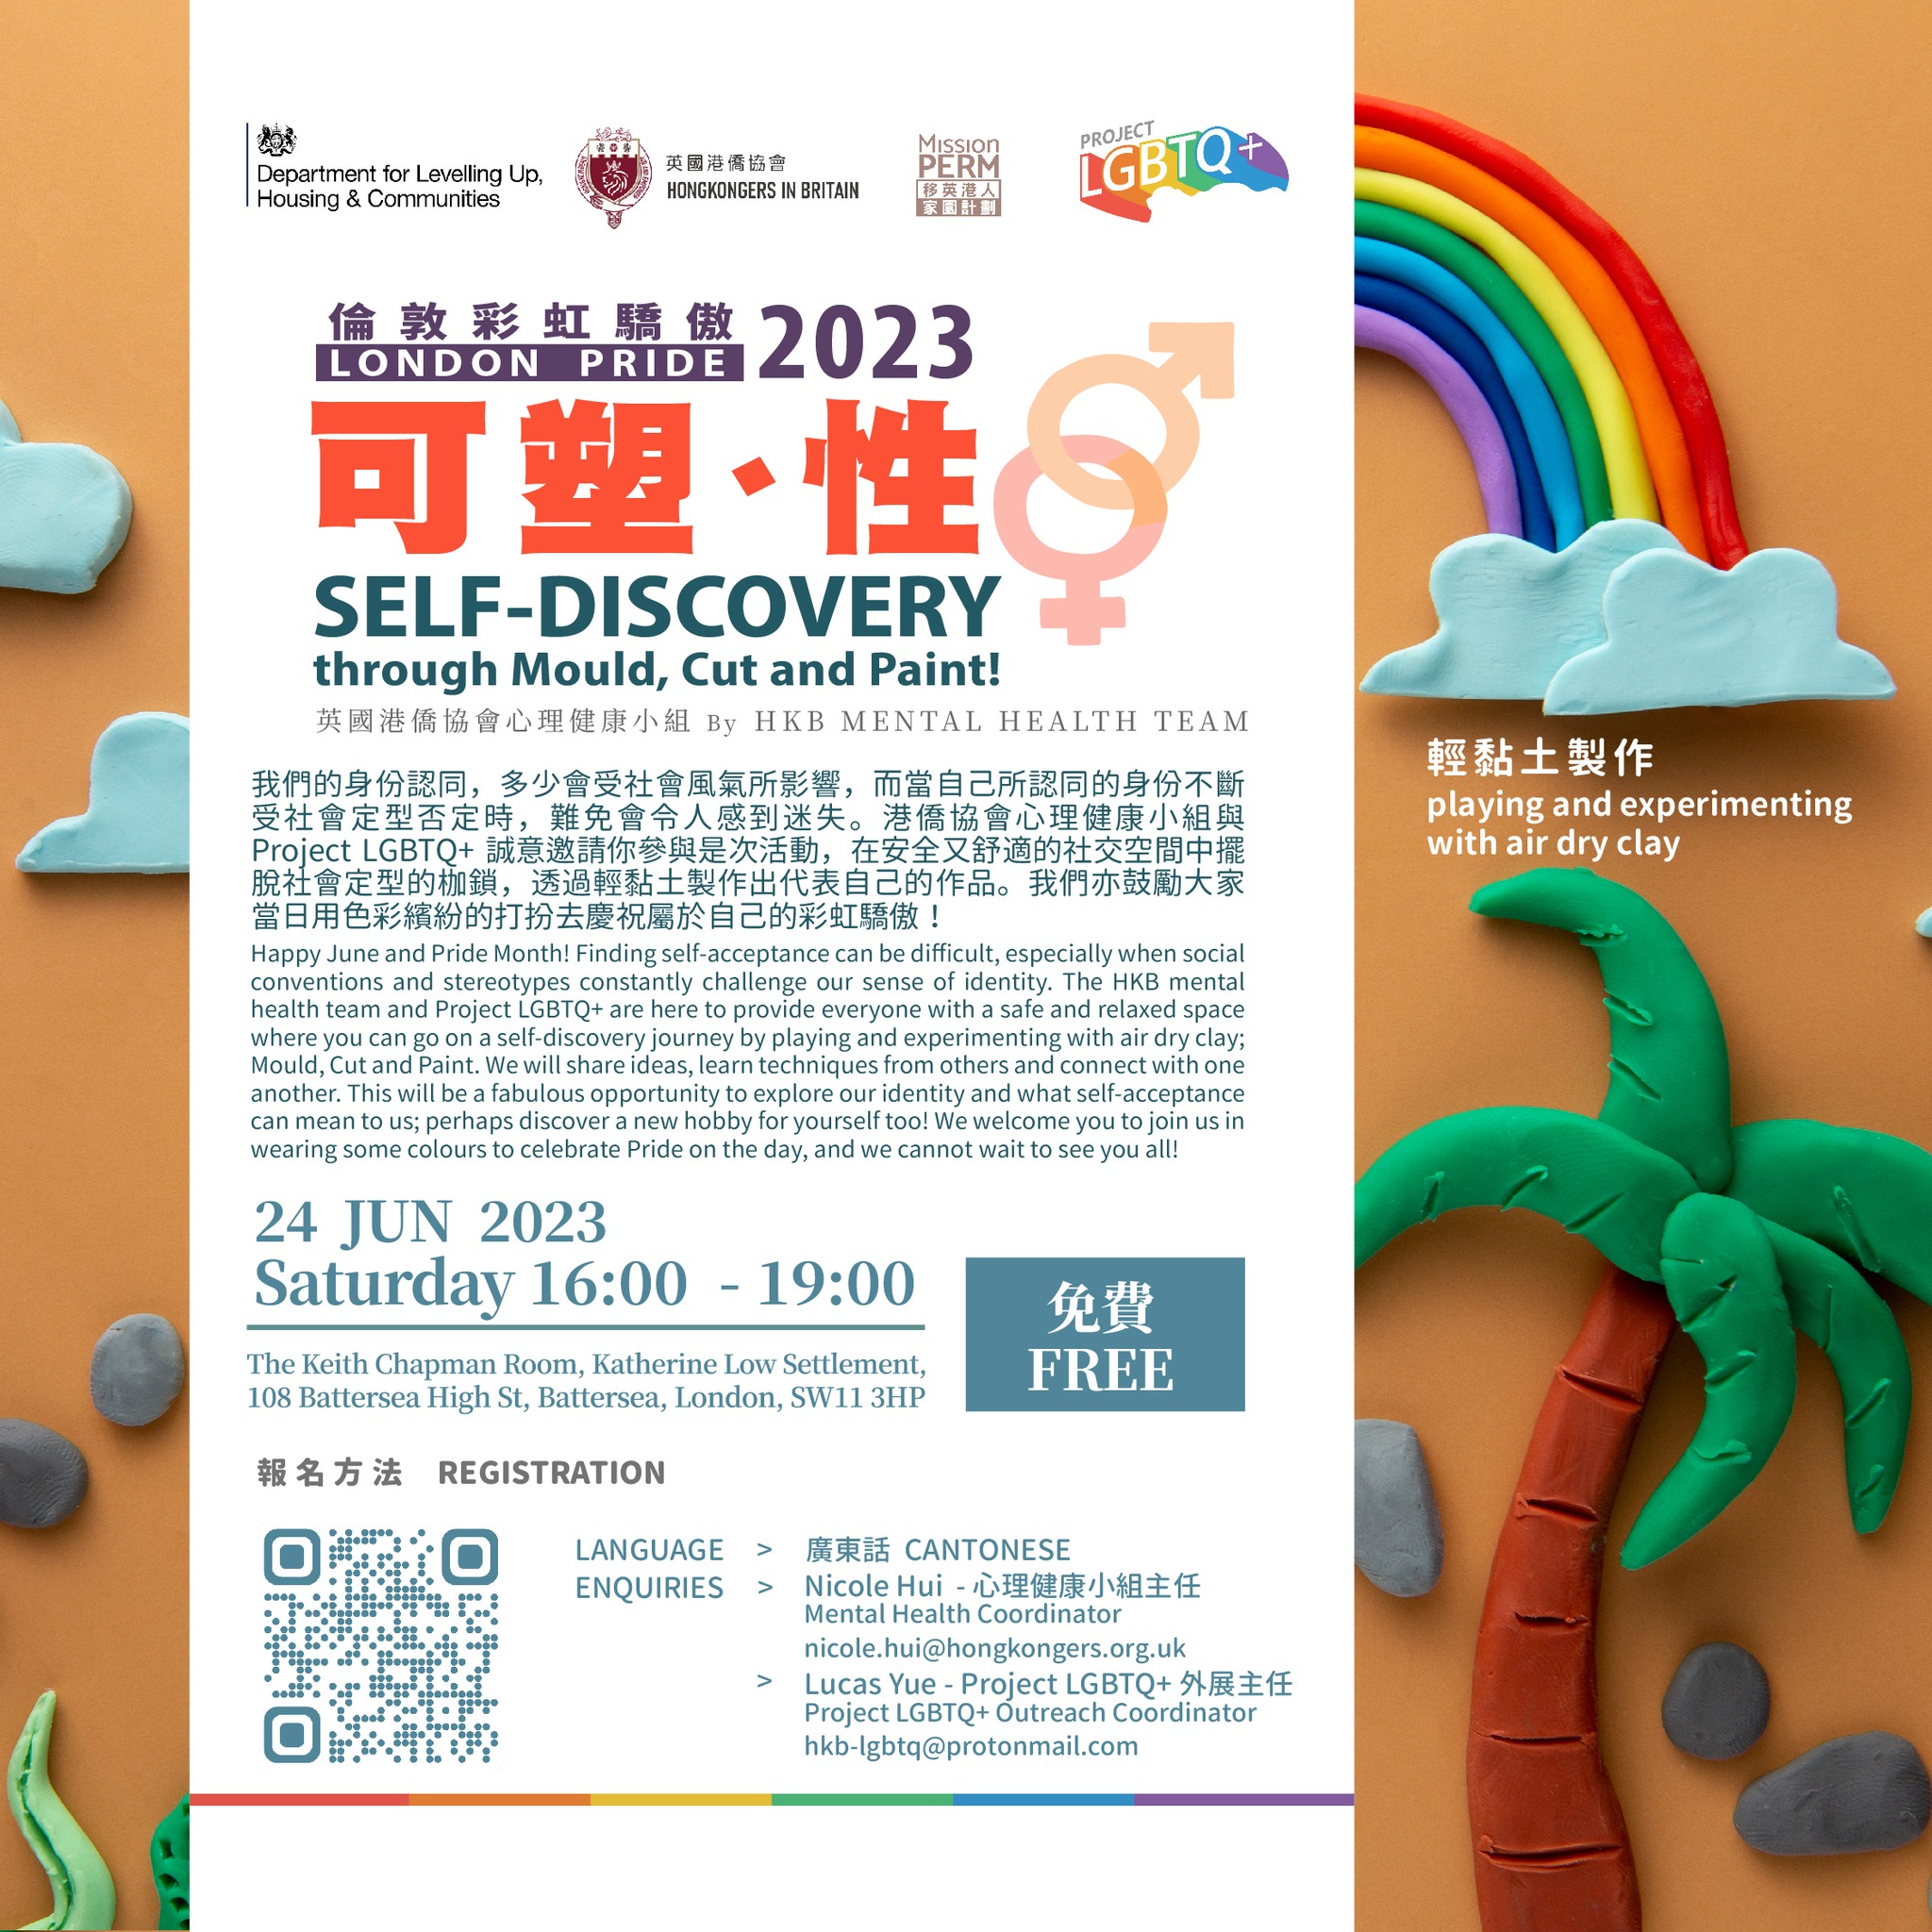 London Pride 2023: Self-discovery through Mould, Cut and Paint!